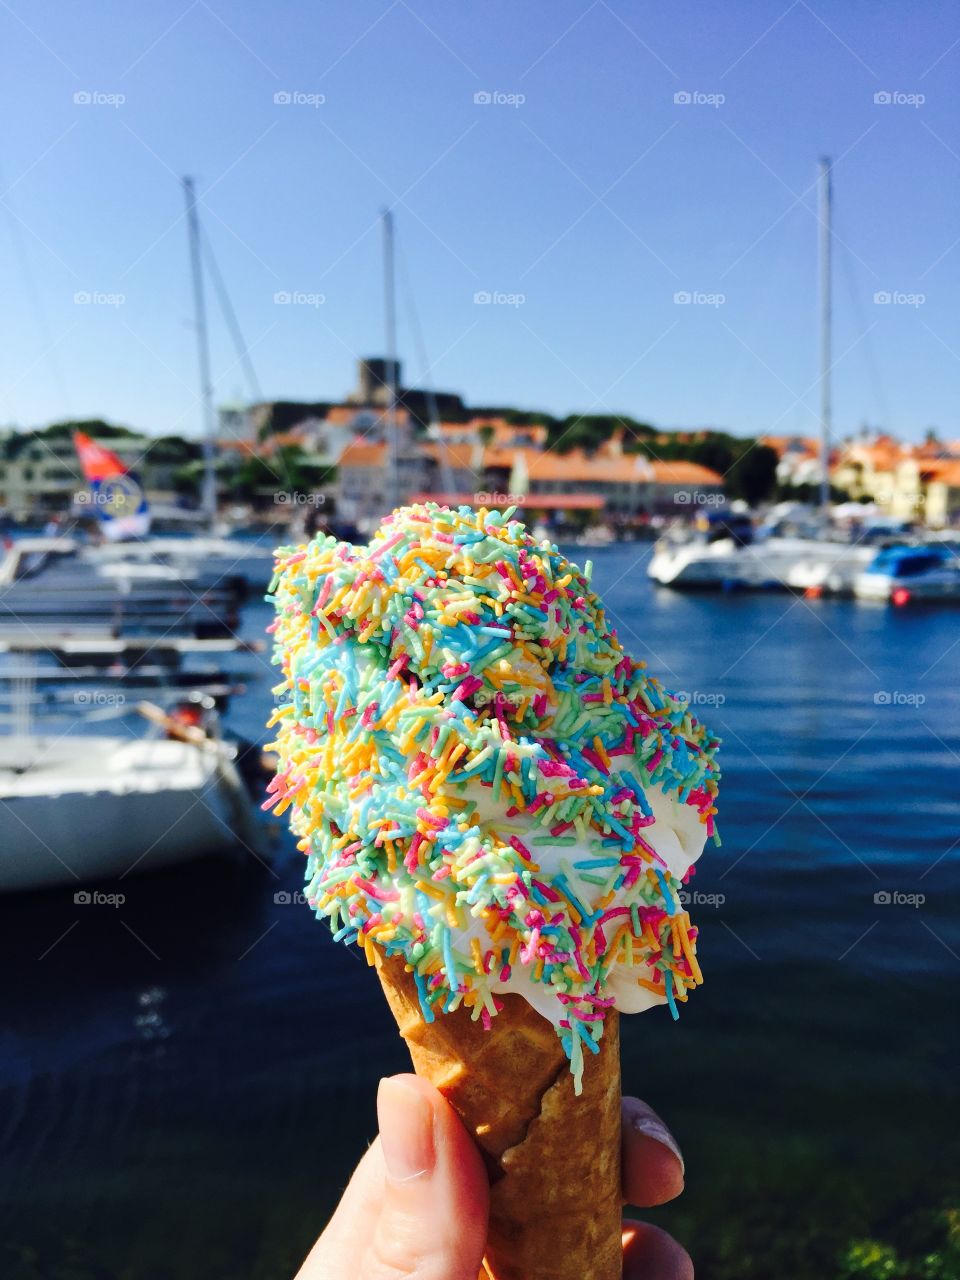 Icecream on a hot day. Visited Marstrand on the west coast in Sweden. Hot day = nice with an icecream